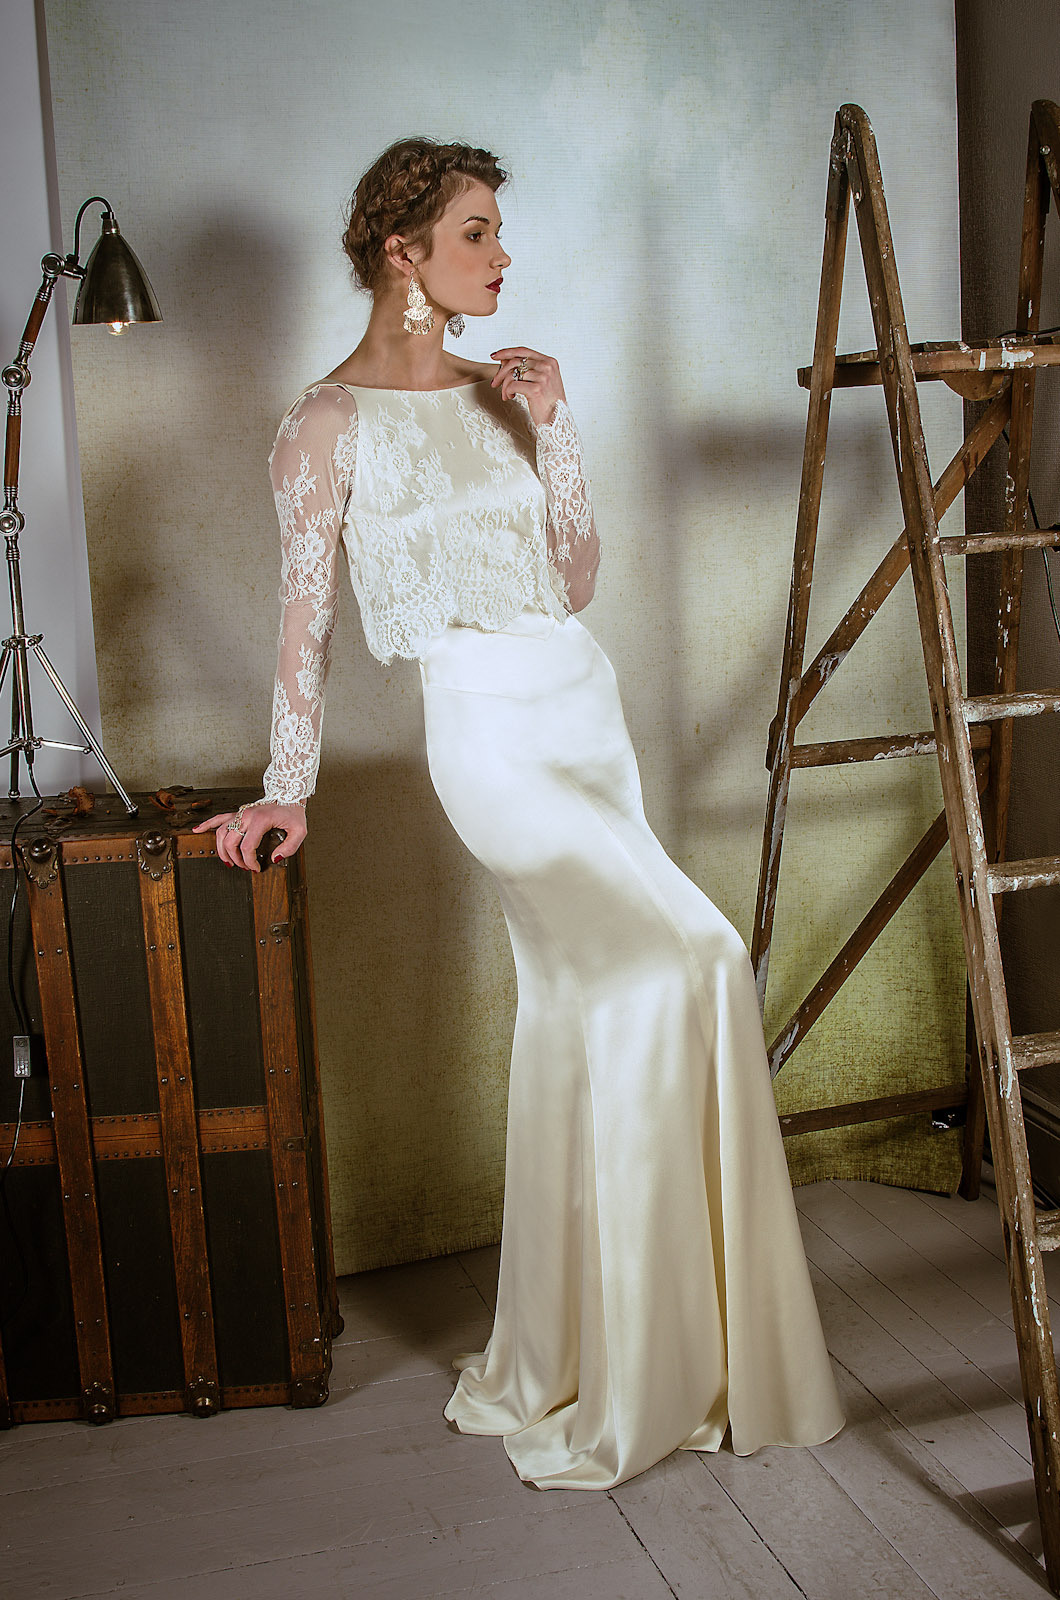 Belle & Bunty's 2014 Bridal Capsule Collection - Valentina